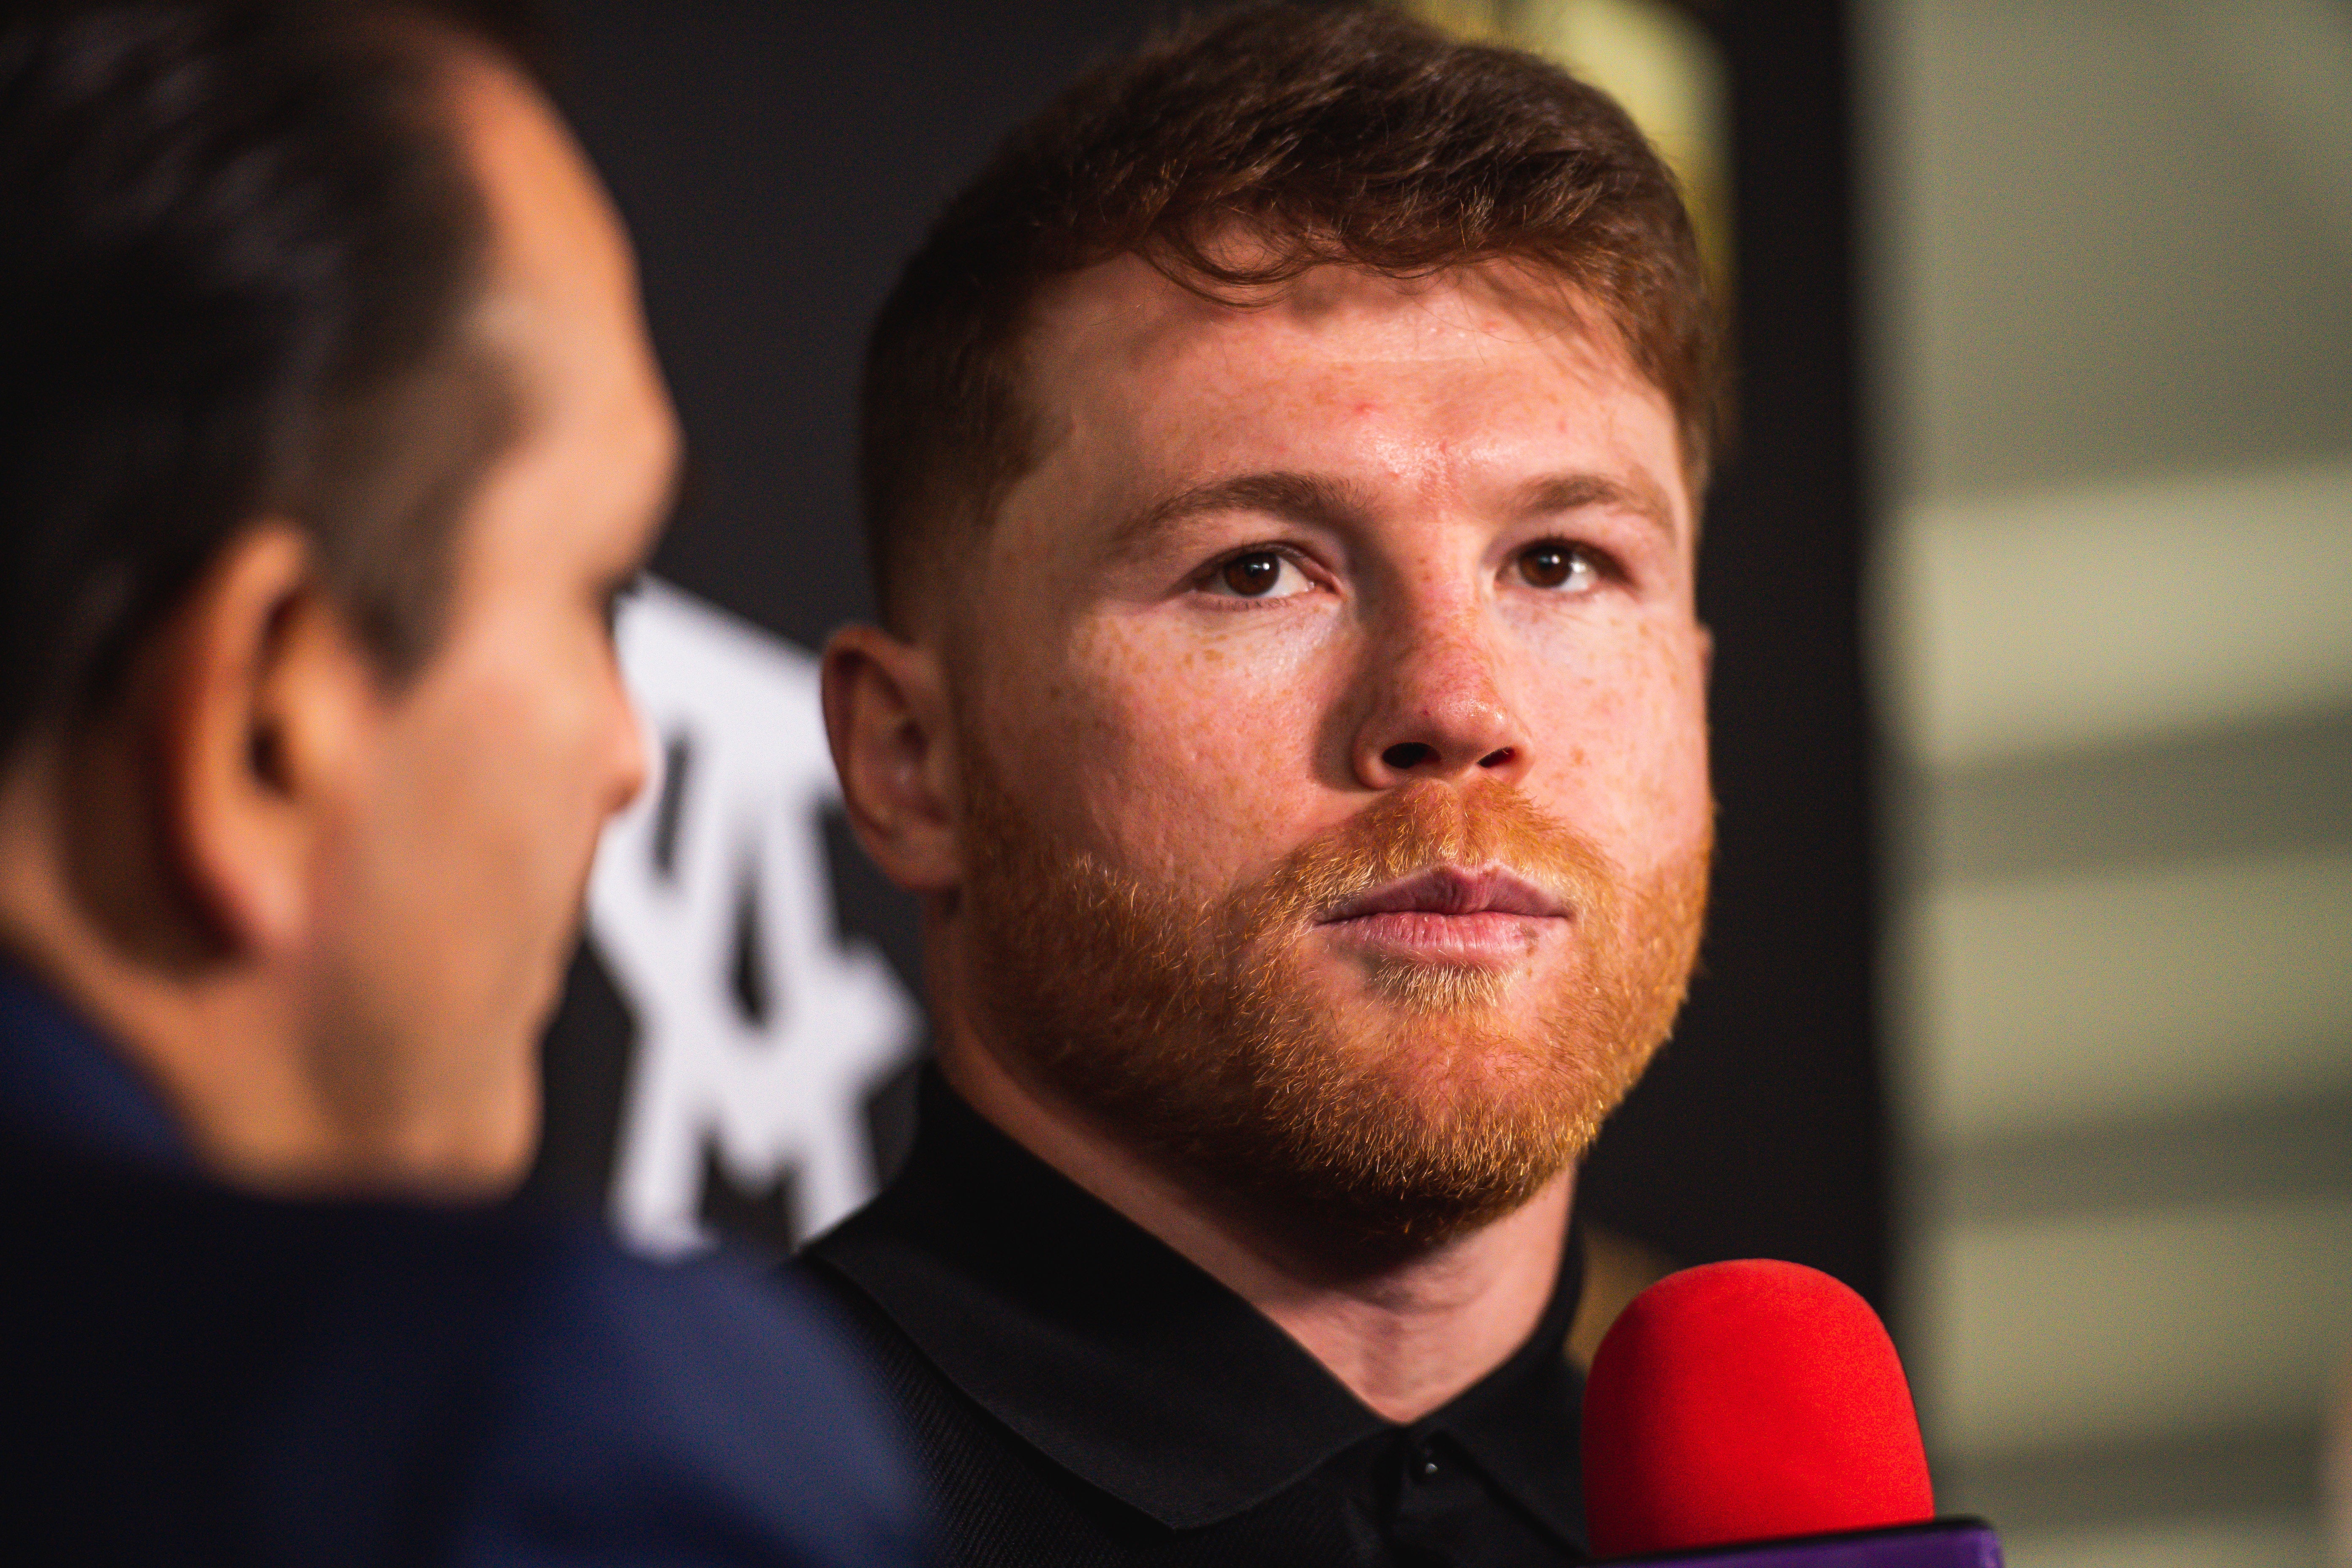 Canelo Alvarez has hinted he could one day fight the UFC star